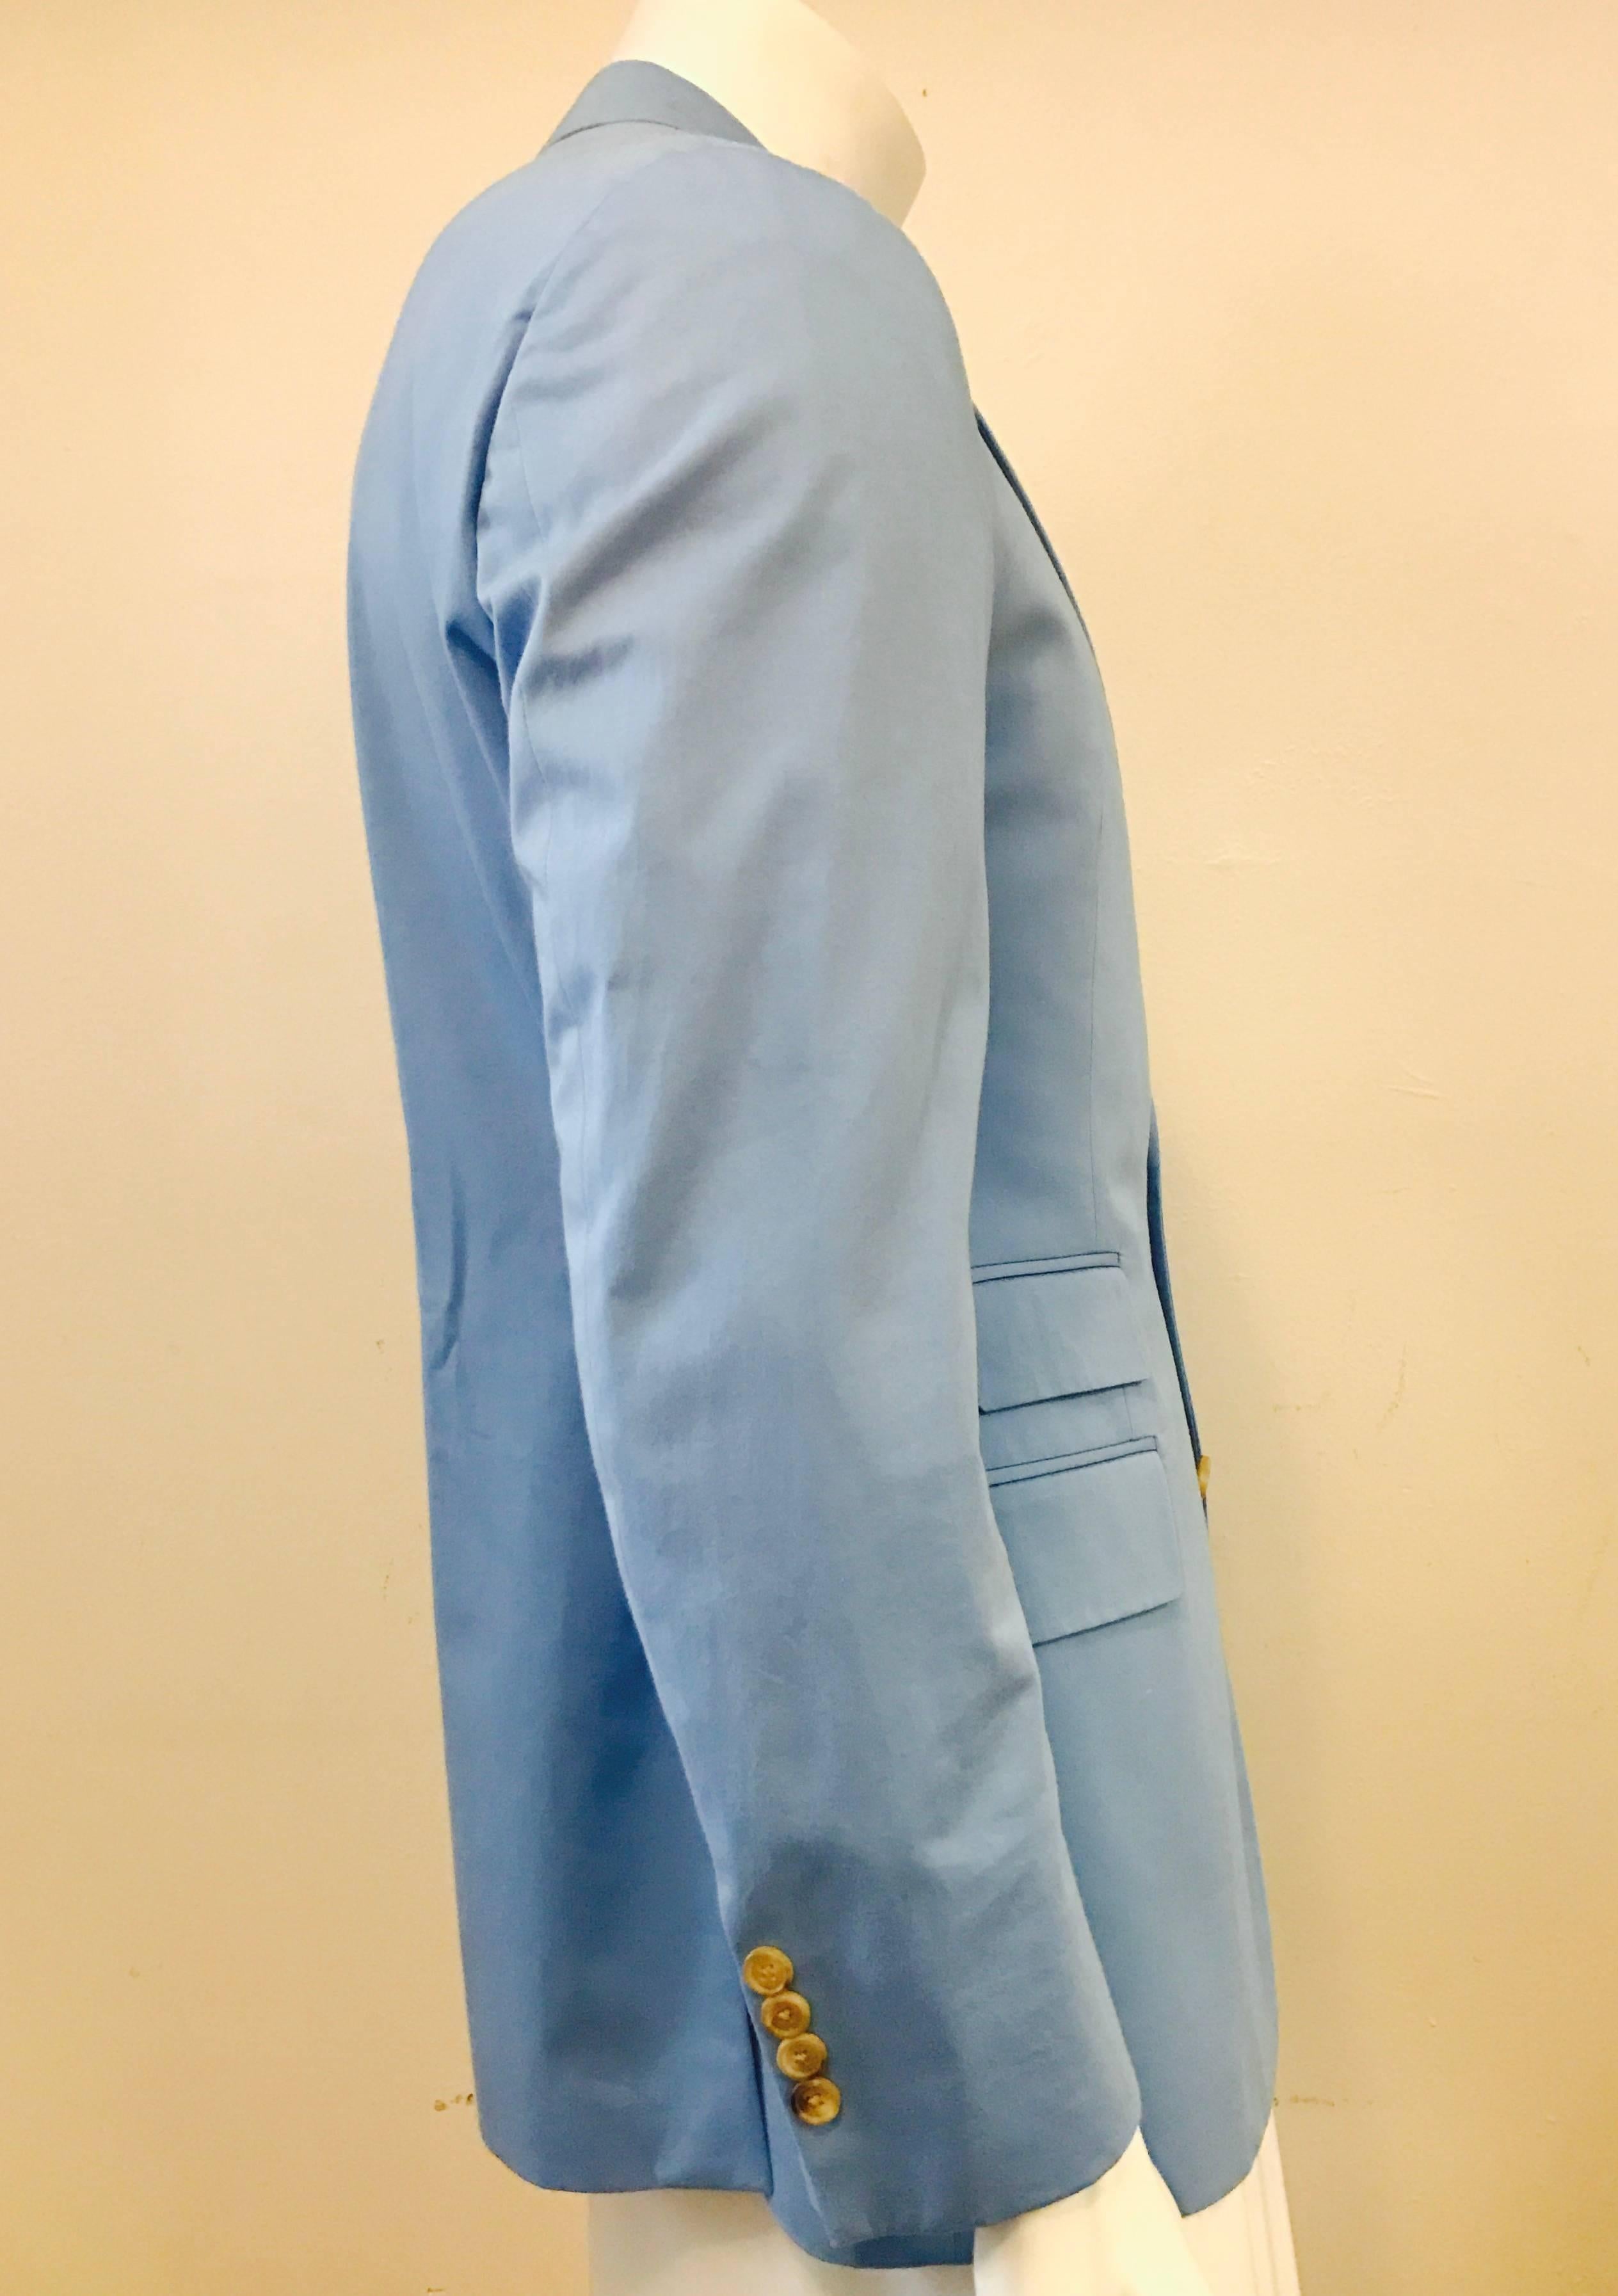 Lovely lightweight jacket in pale blue cotton, fully lined, with three interior slit pockets.  There are three flap pockets that have never been un-stitched, and one slit pocket on the front, as well as a boutonniere on the notch collar.The back